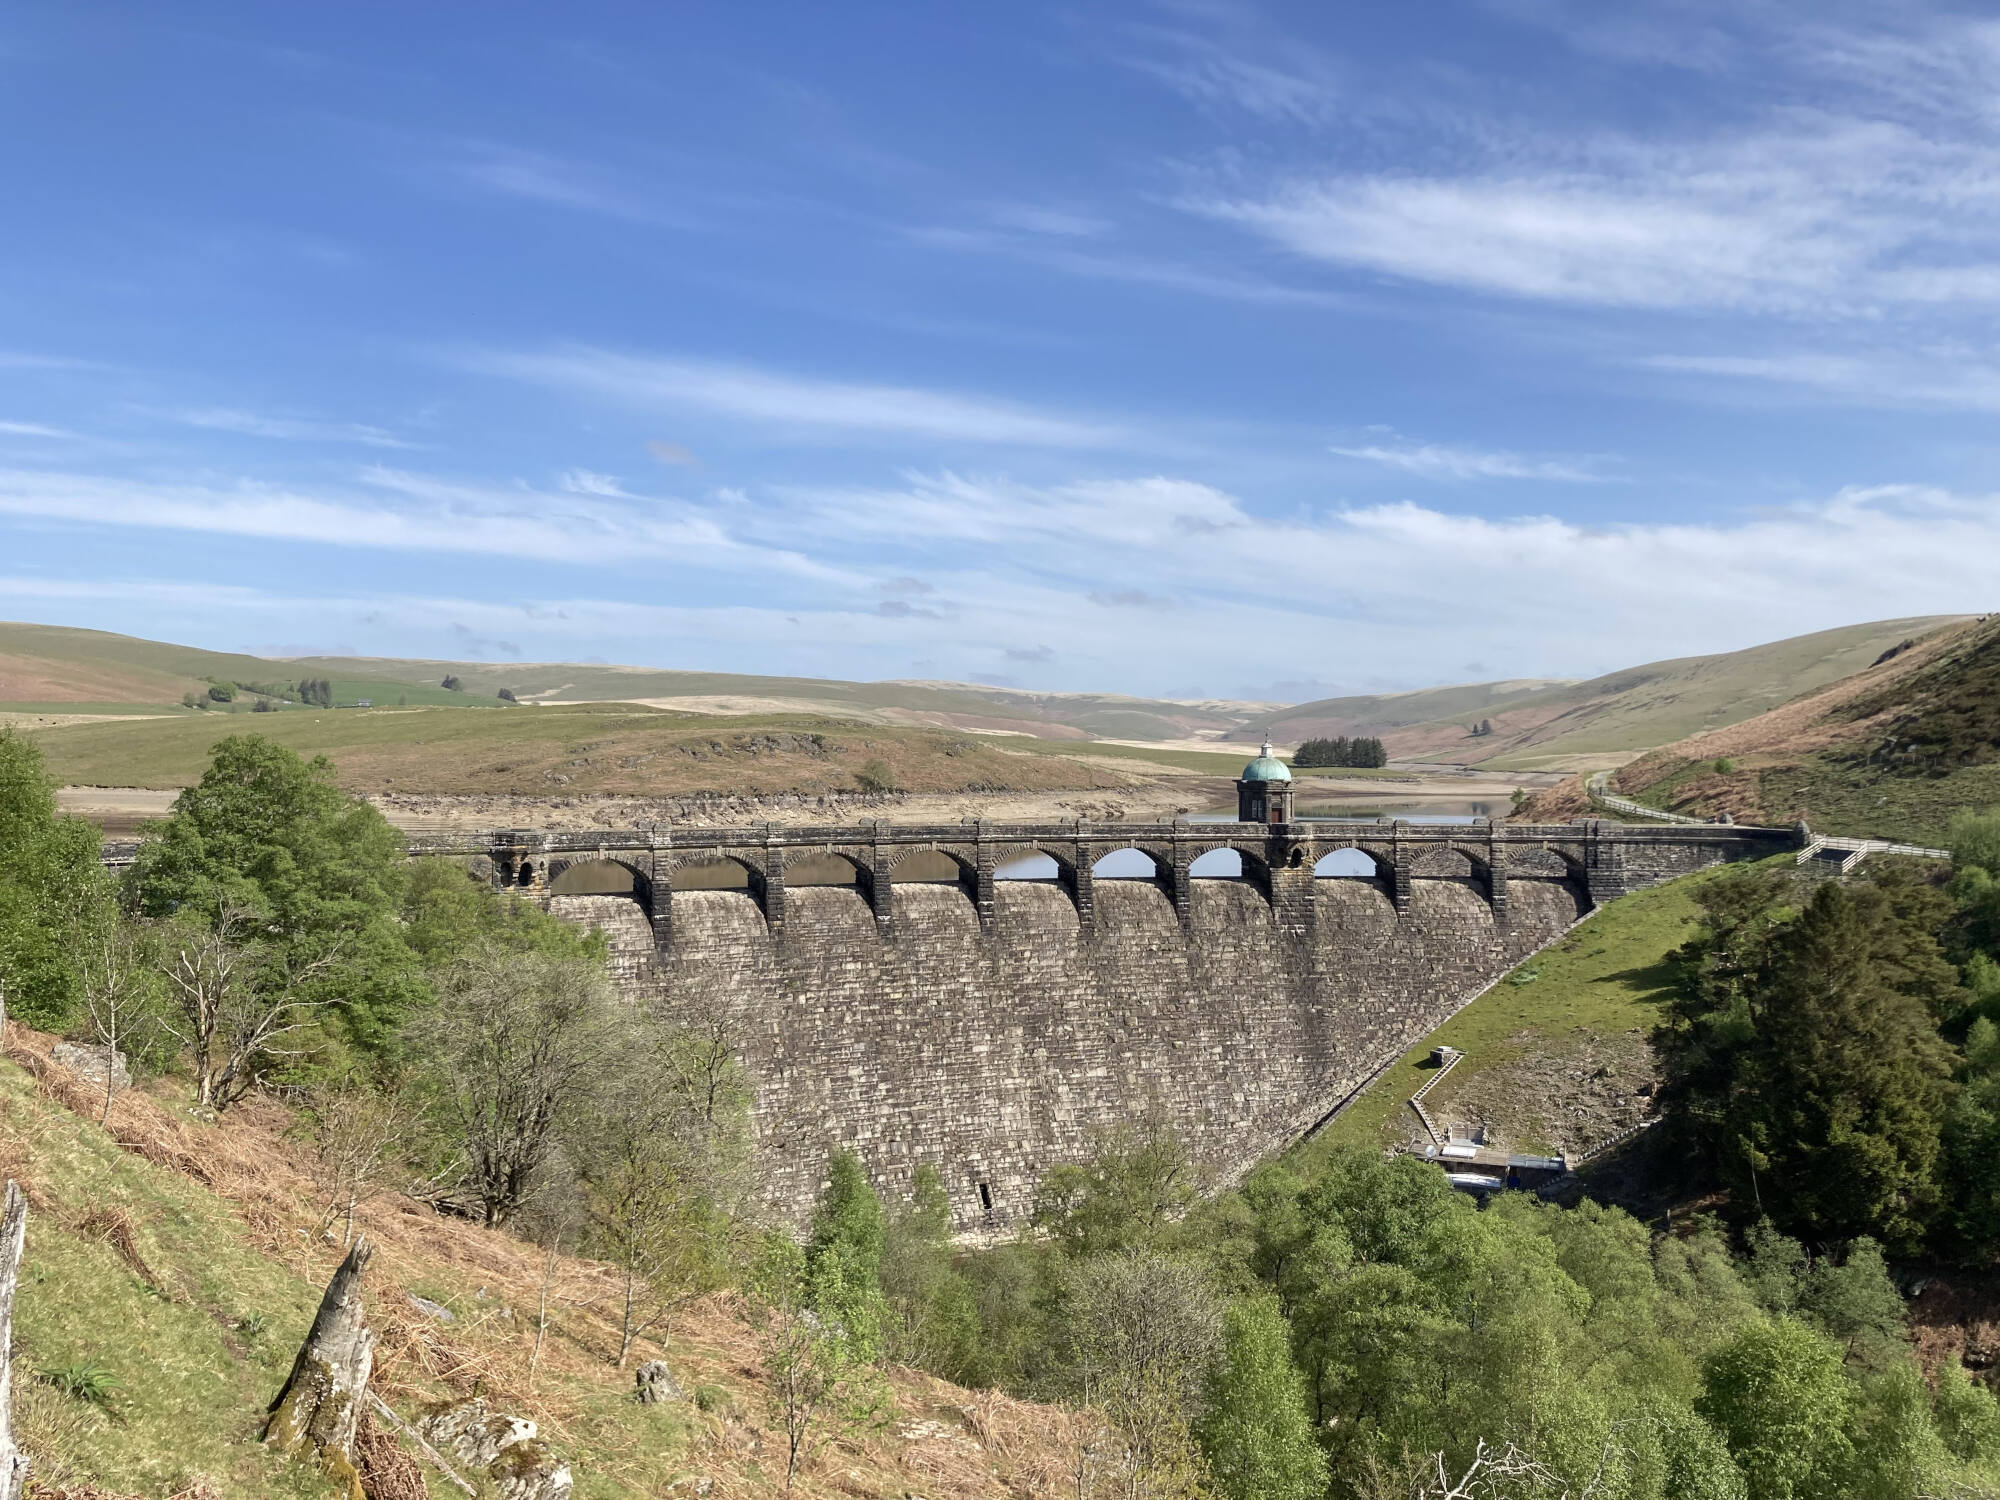 Cycling cafes and cycle rides in Elan Valley